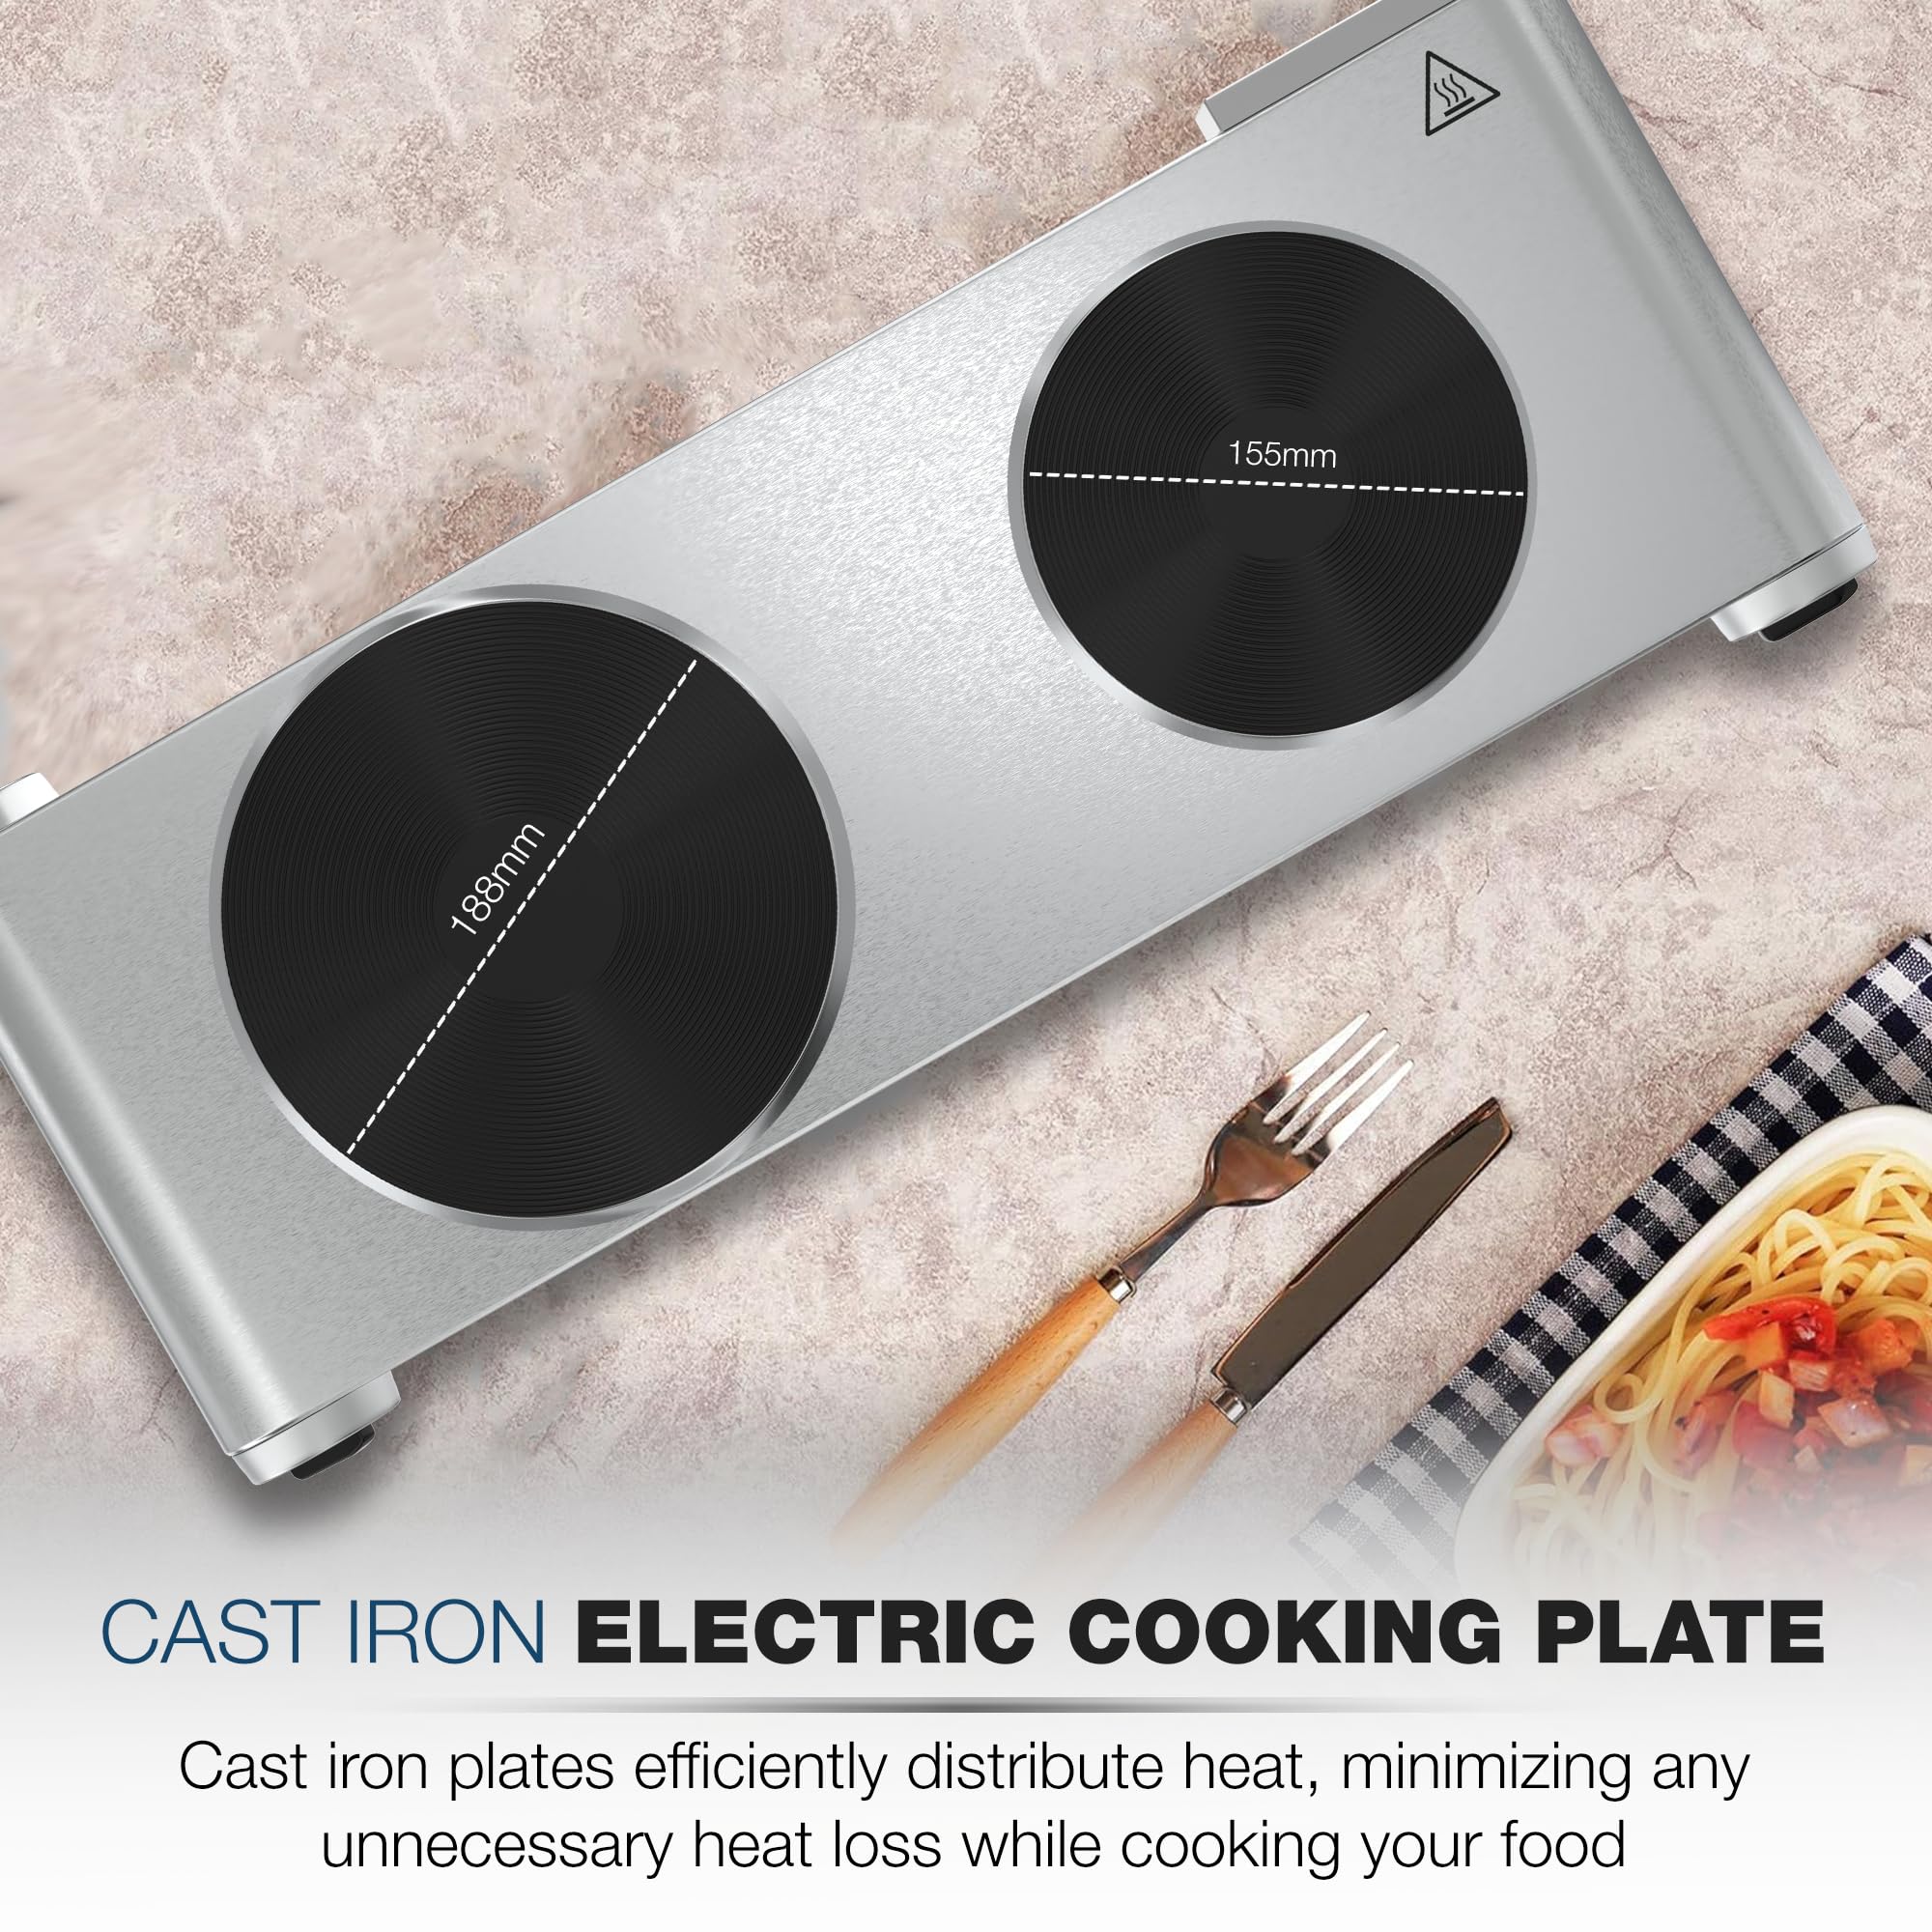 Nikai Double Hot Plate - Twin Cooktop, 2500W Power, Adjustable Thermostat, Overheat Protection, Die Cast Iron Hotplates, Stainless Steel Body, Easy Control, Power indicator light - NKTOE5N2